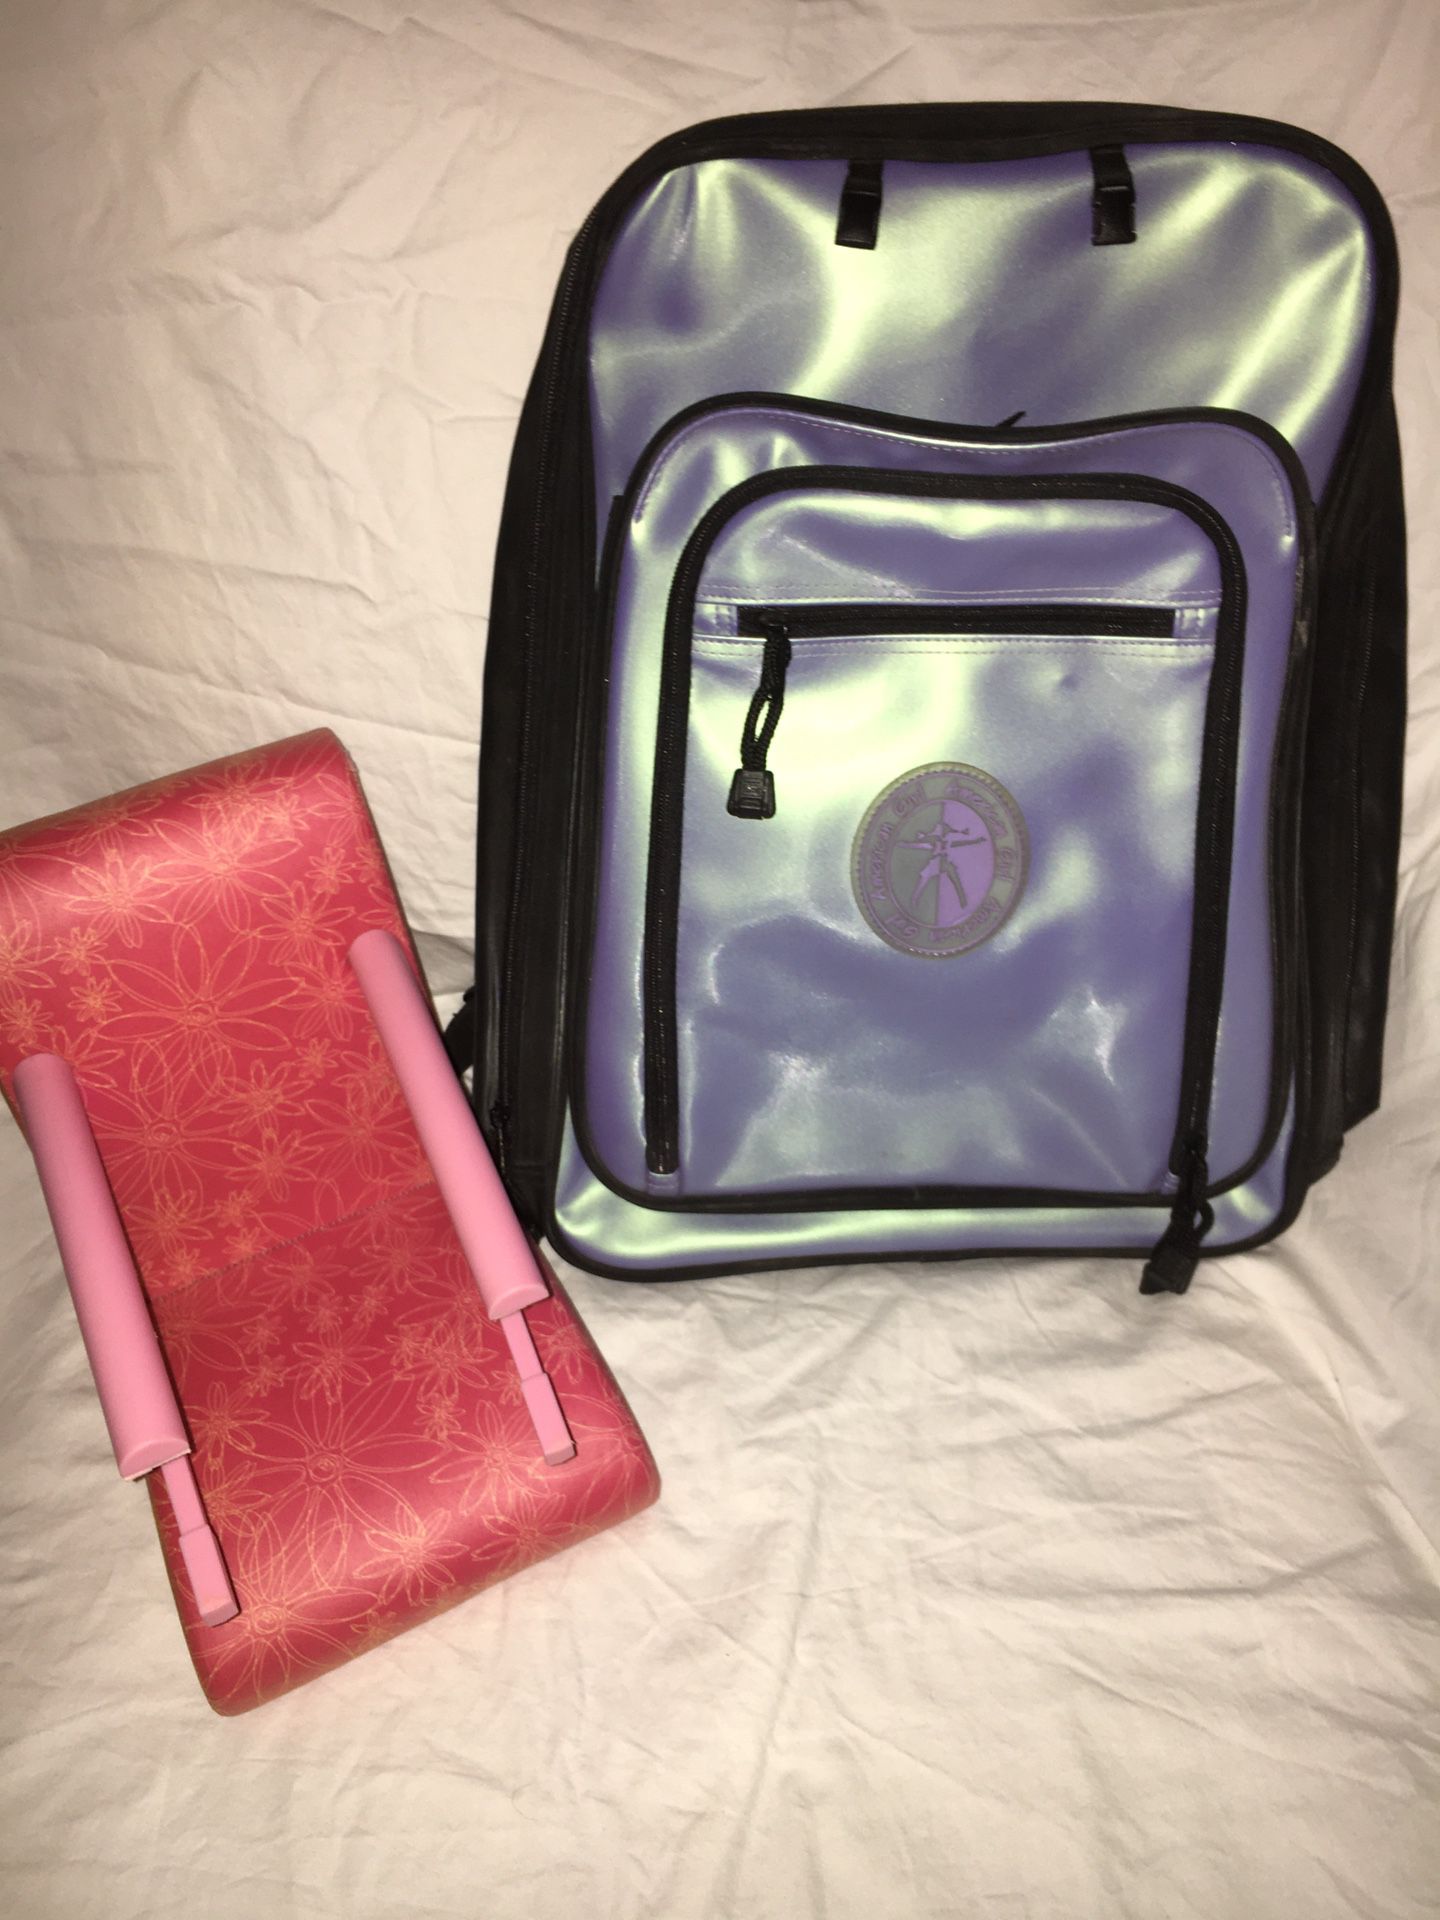 American Girl Doll Treat Seat and AG Backpack for Girl